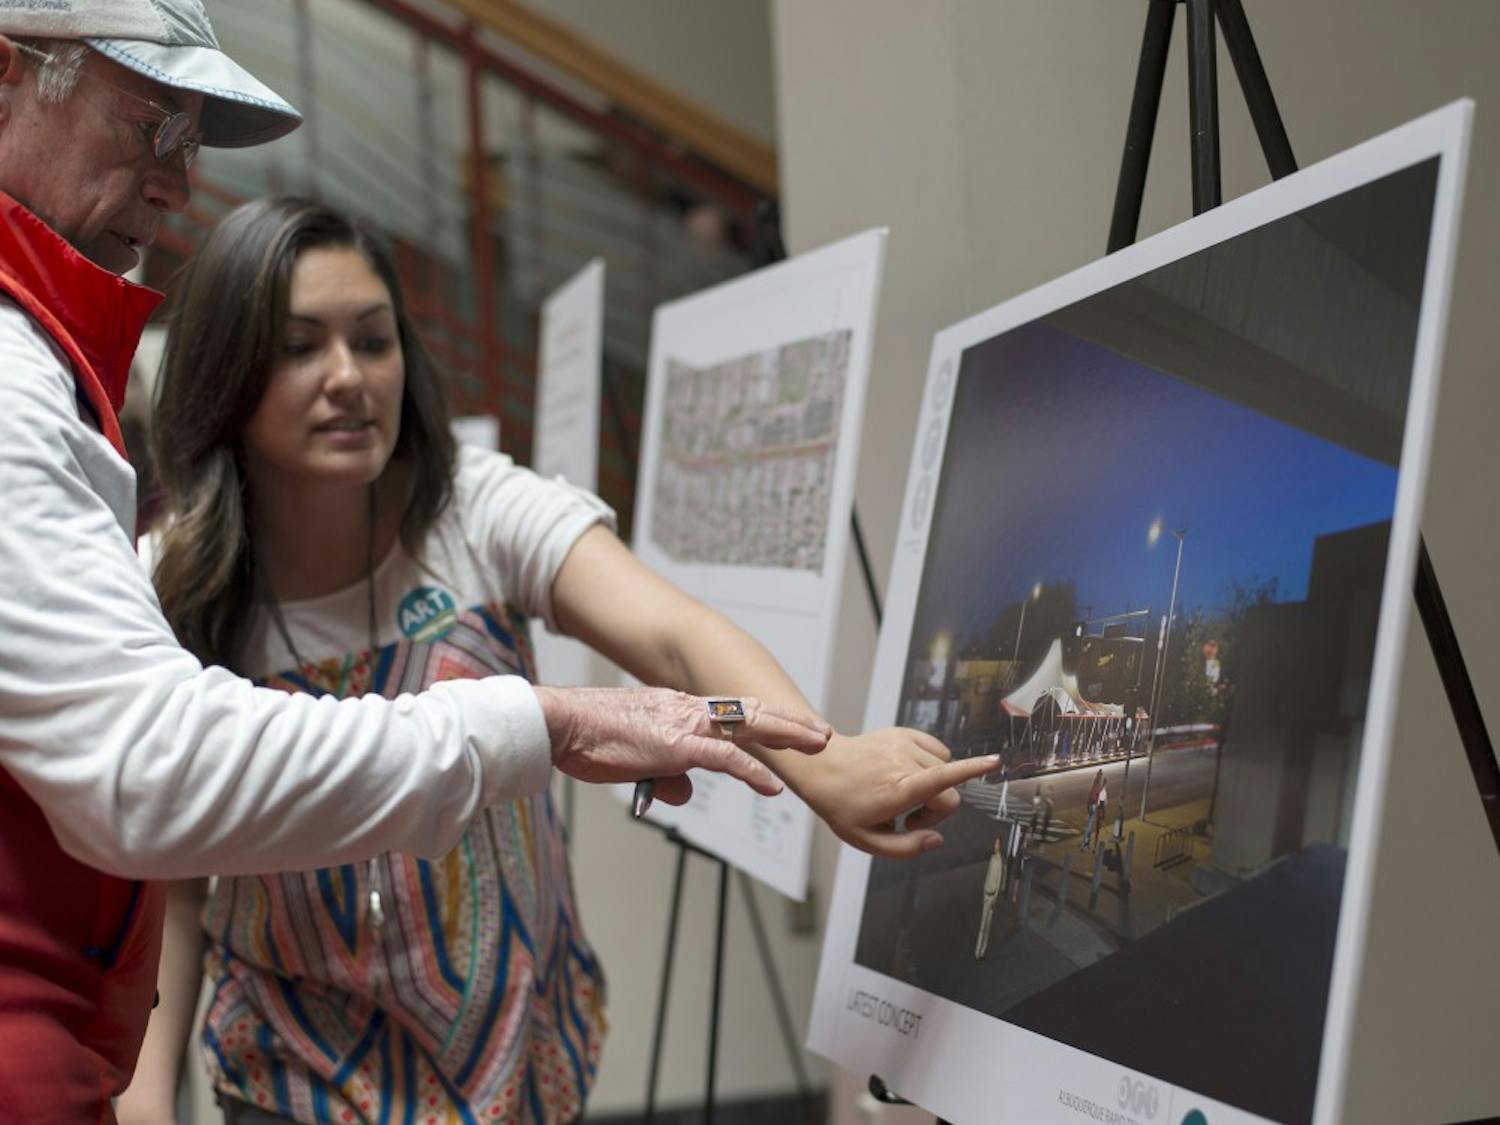 Davida Hollis explains to Josep Powers how the new Albuquerque Rapid Transit Cornell location will look. ART plans to develop multiple transit systems that run across Albuquerque, making public transportation faster than the pre-existing bus systems. 